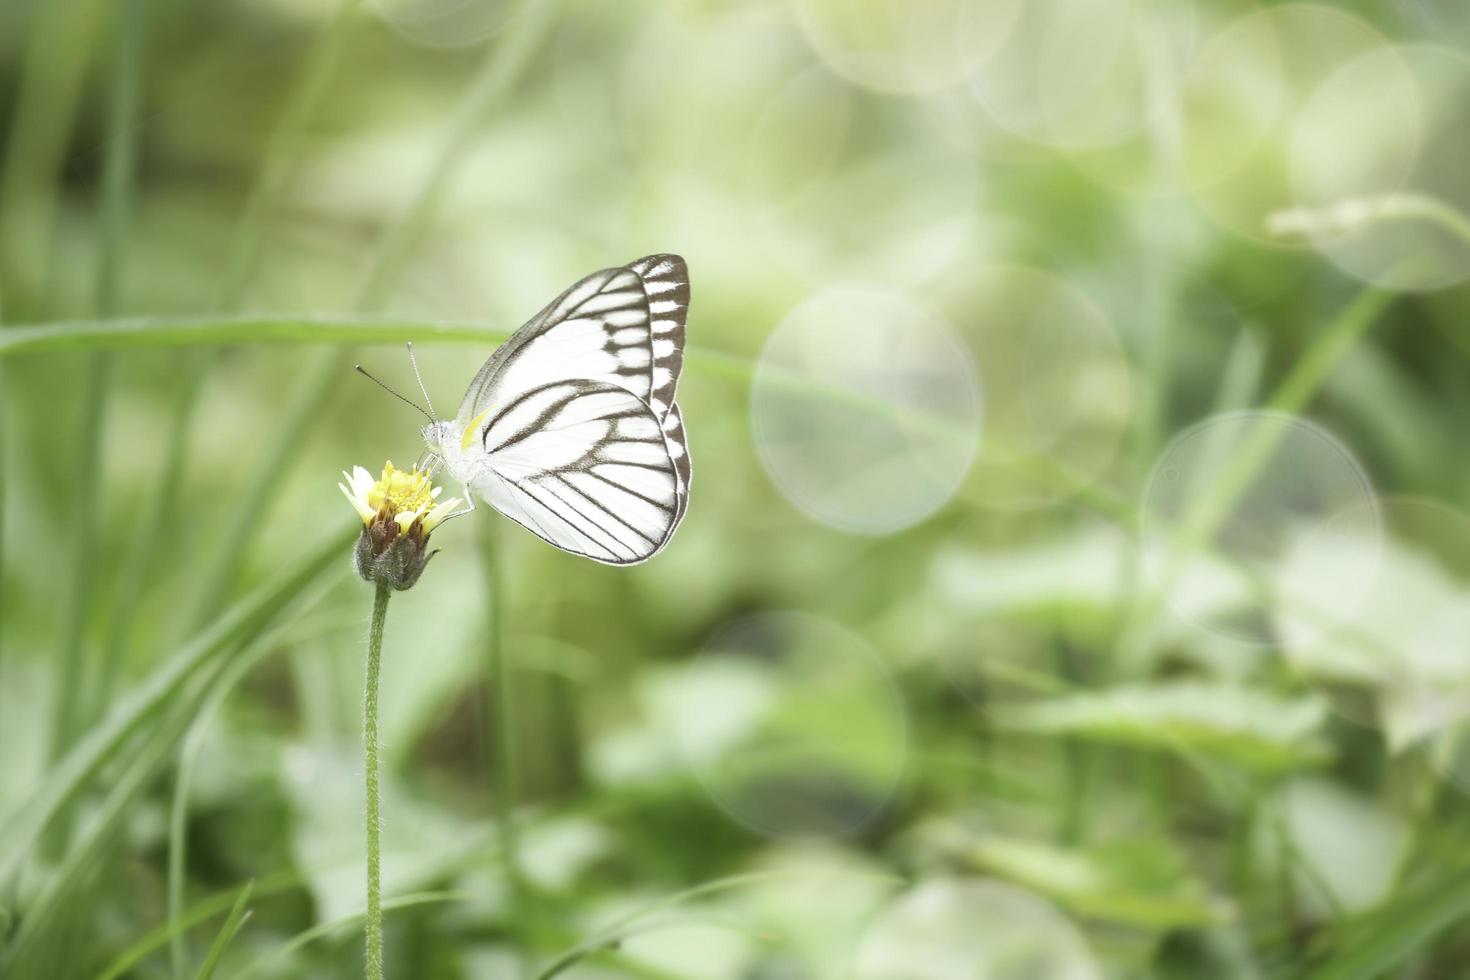 Butterfly on wildflower in summer field, beautiful insect on green nature blurred background, wildlife in spring garden, Ecology natural landscape photo